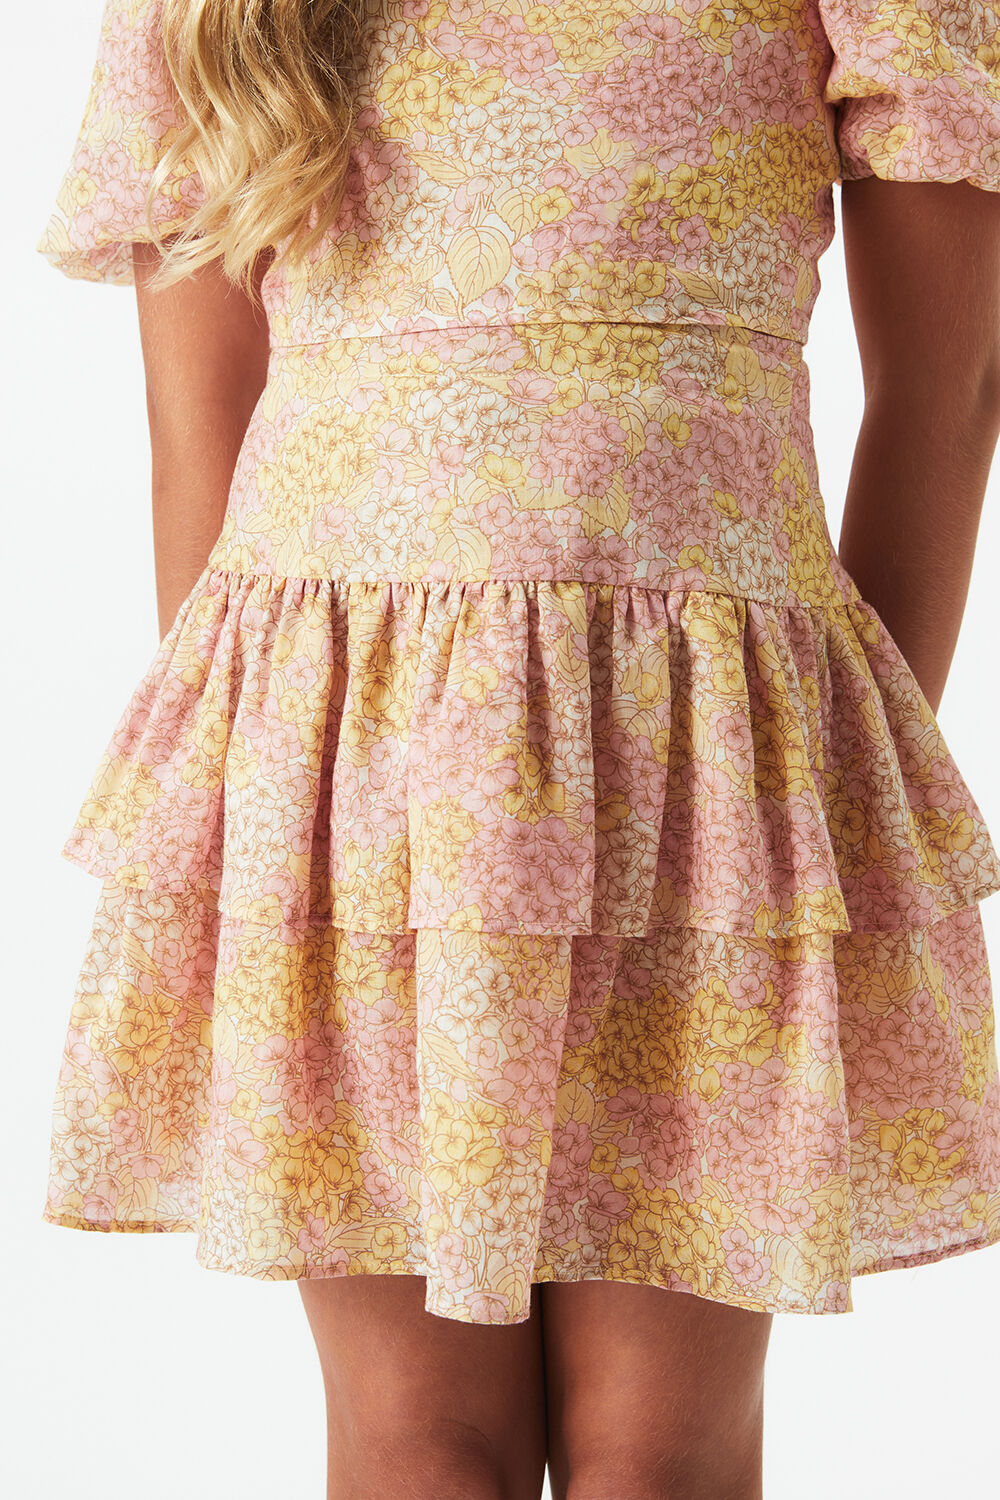 GIRLS AMEILA FLORAL SKIRT in colour EL N YELLOW